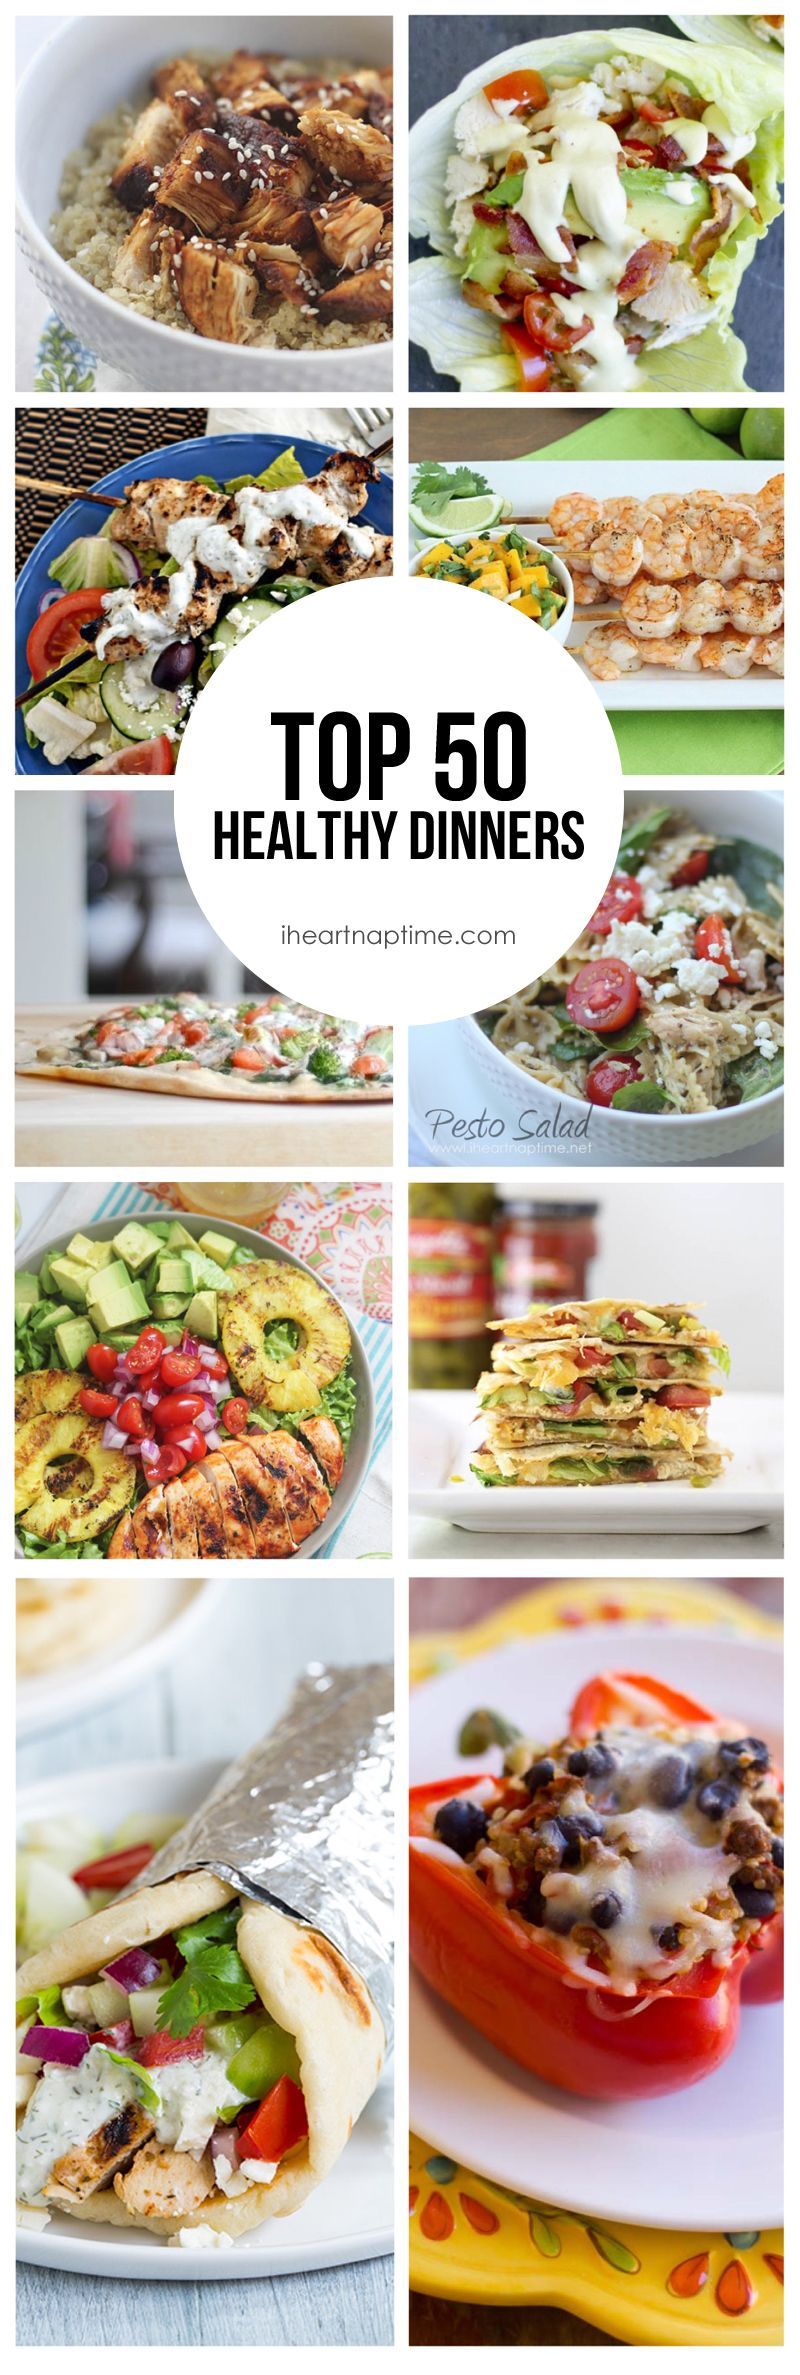 Top 50 Healthy Dinners -so many delicious recipes to try! Great healthy meal ideas.